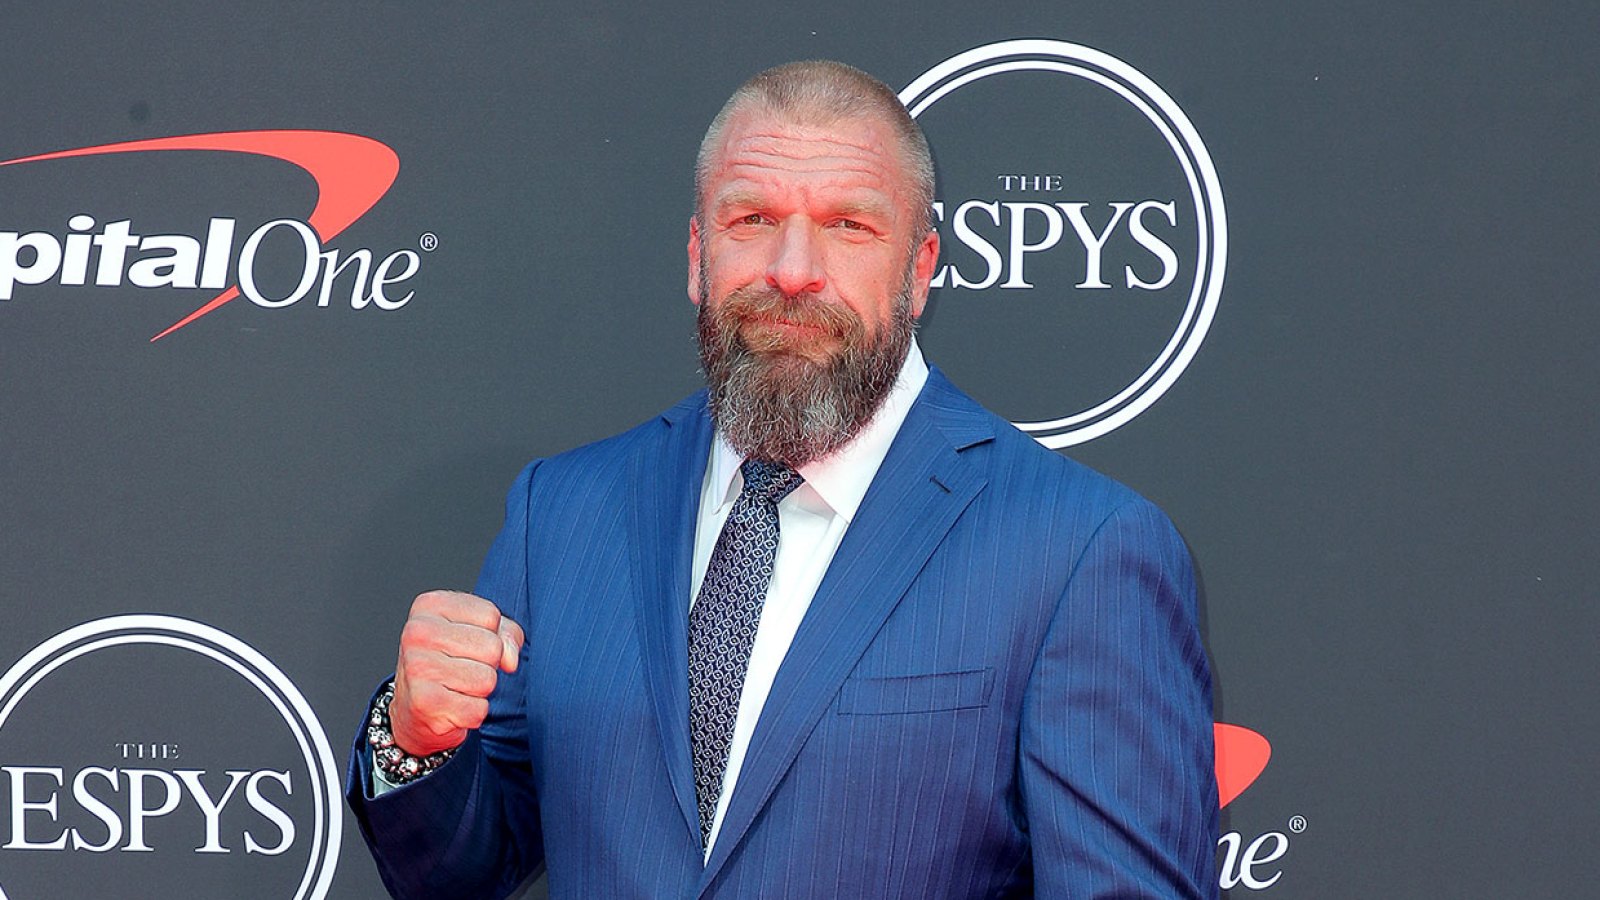 WWE legend Triple H, 52, retires from wrestling after having defibrillator  fitted into chest after heart surgery